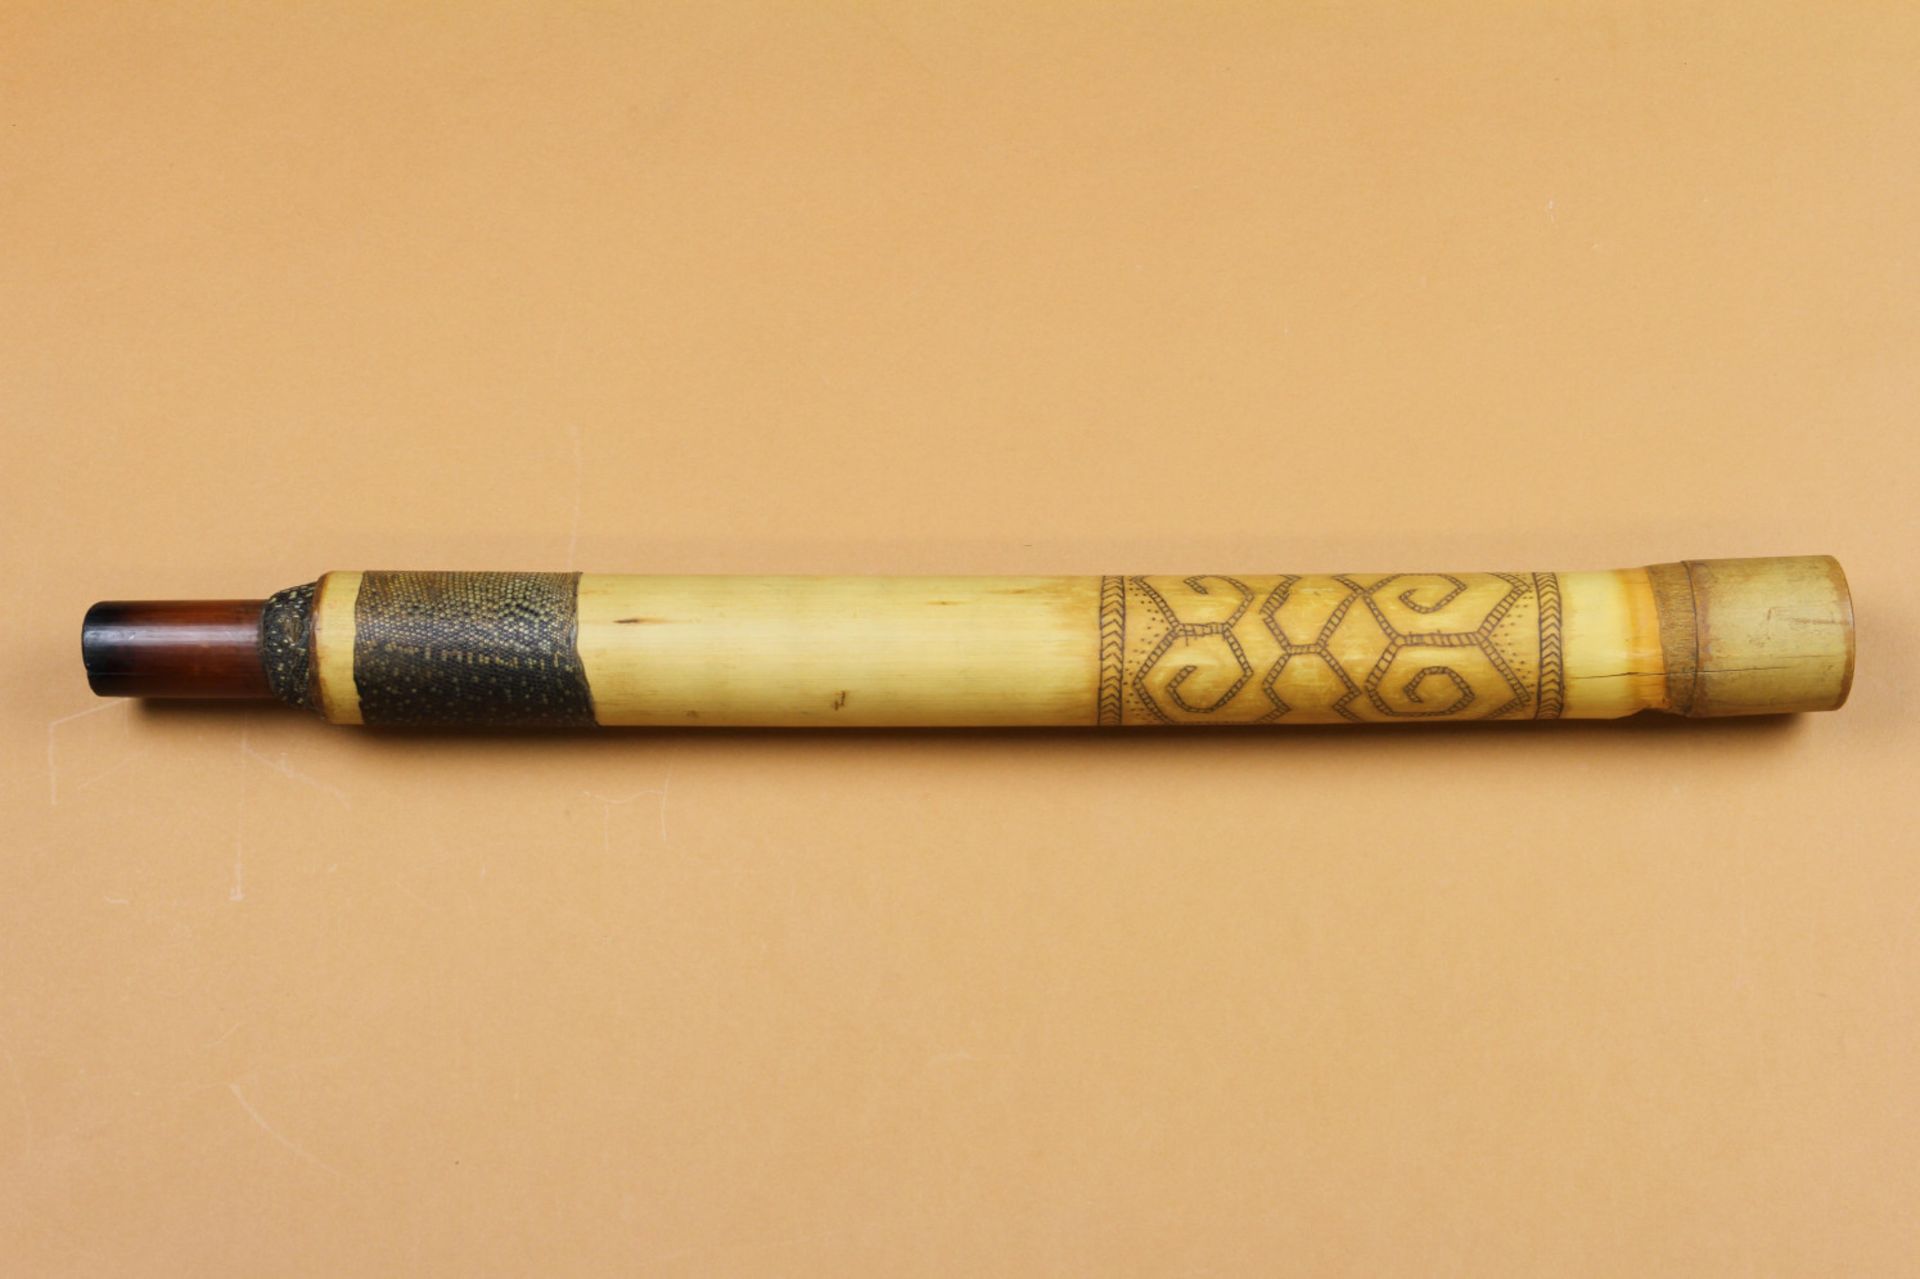 PNG, Highlands, bamboo pipe. - Image 4 of 6